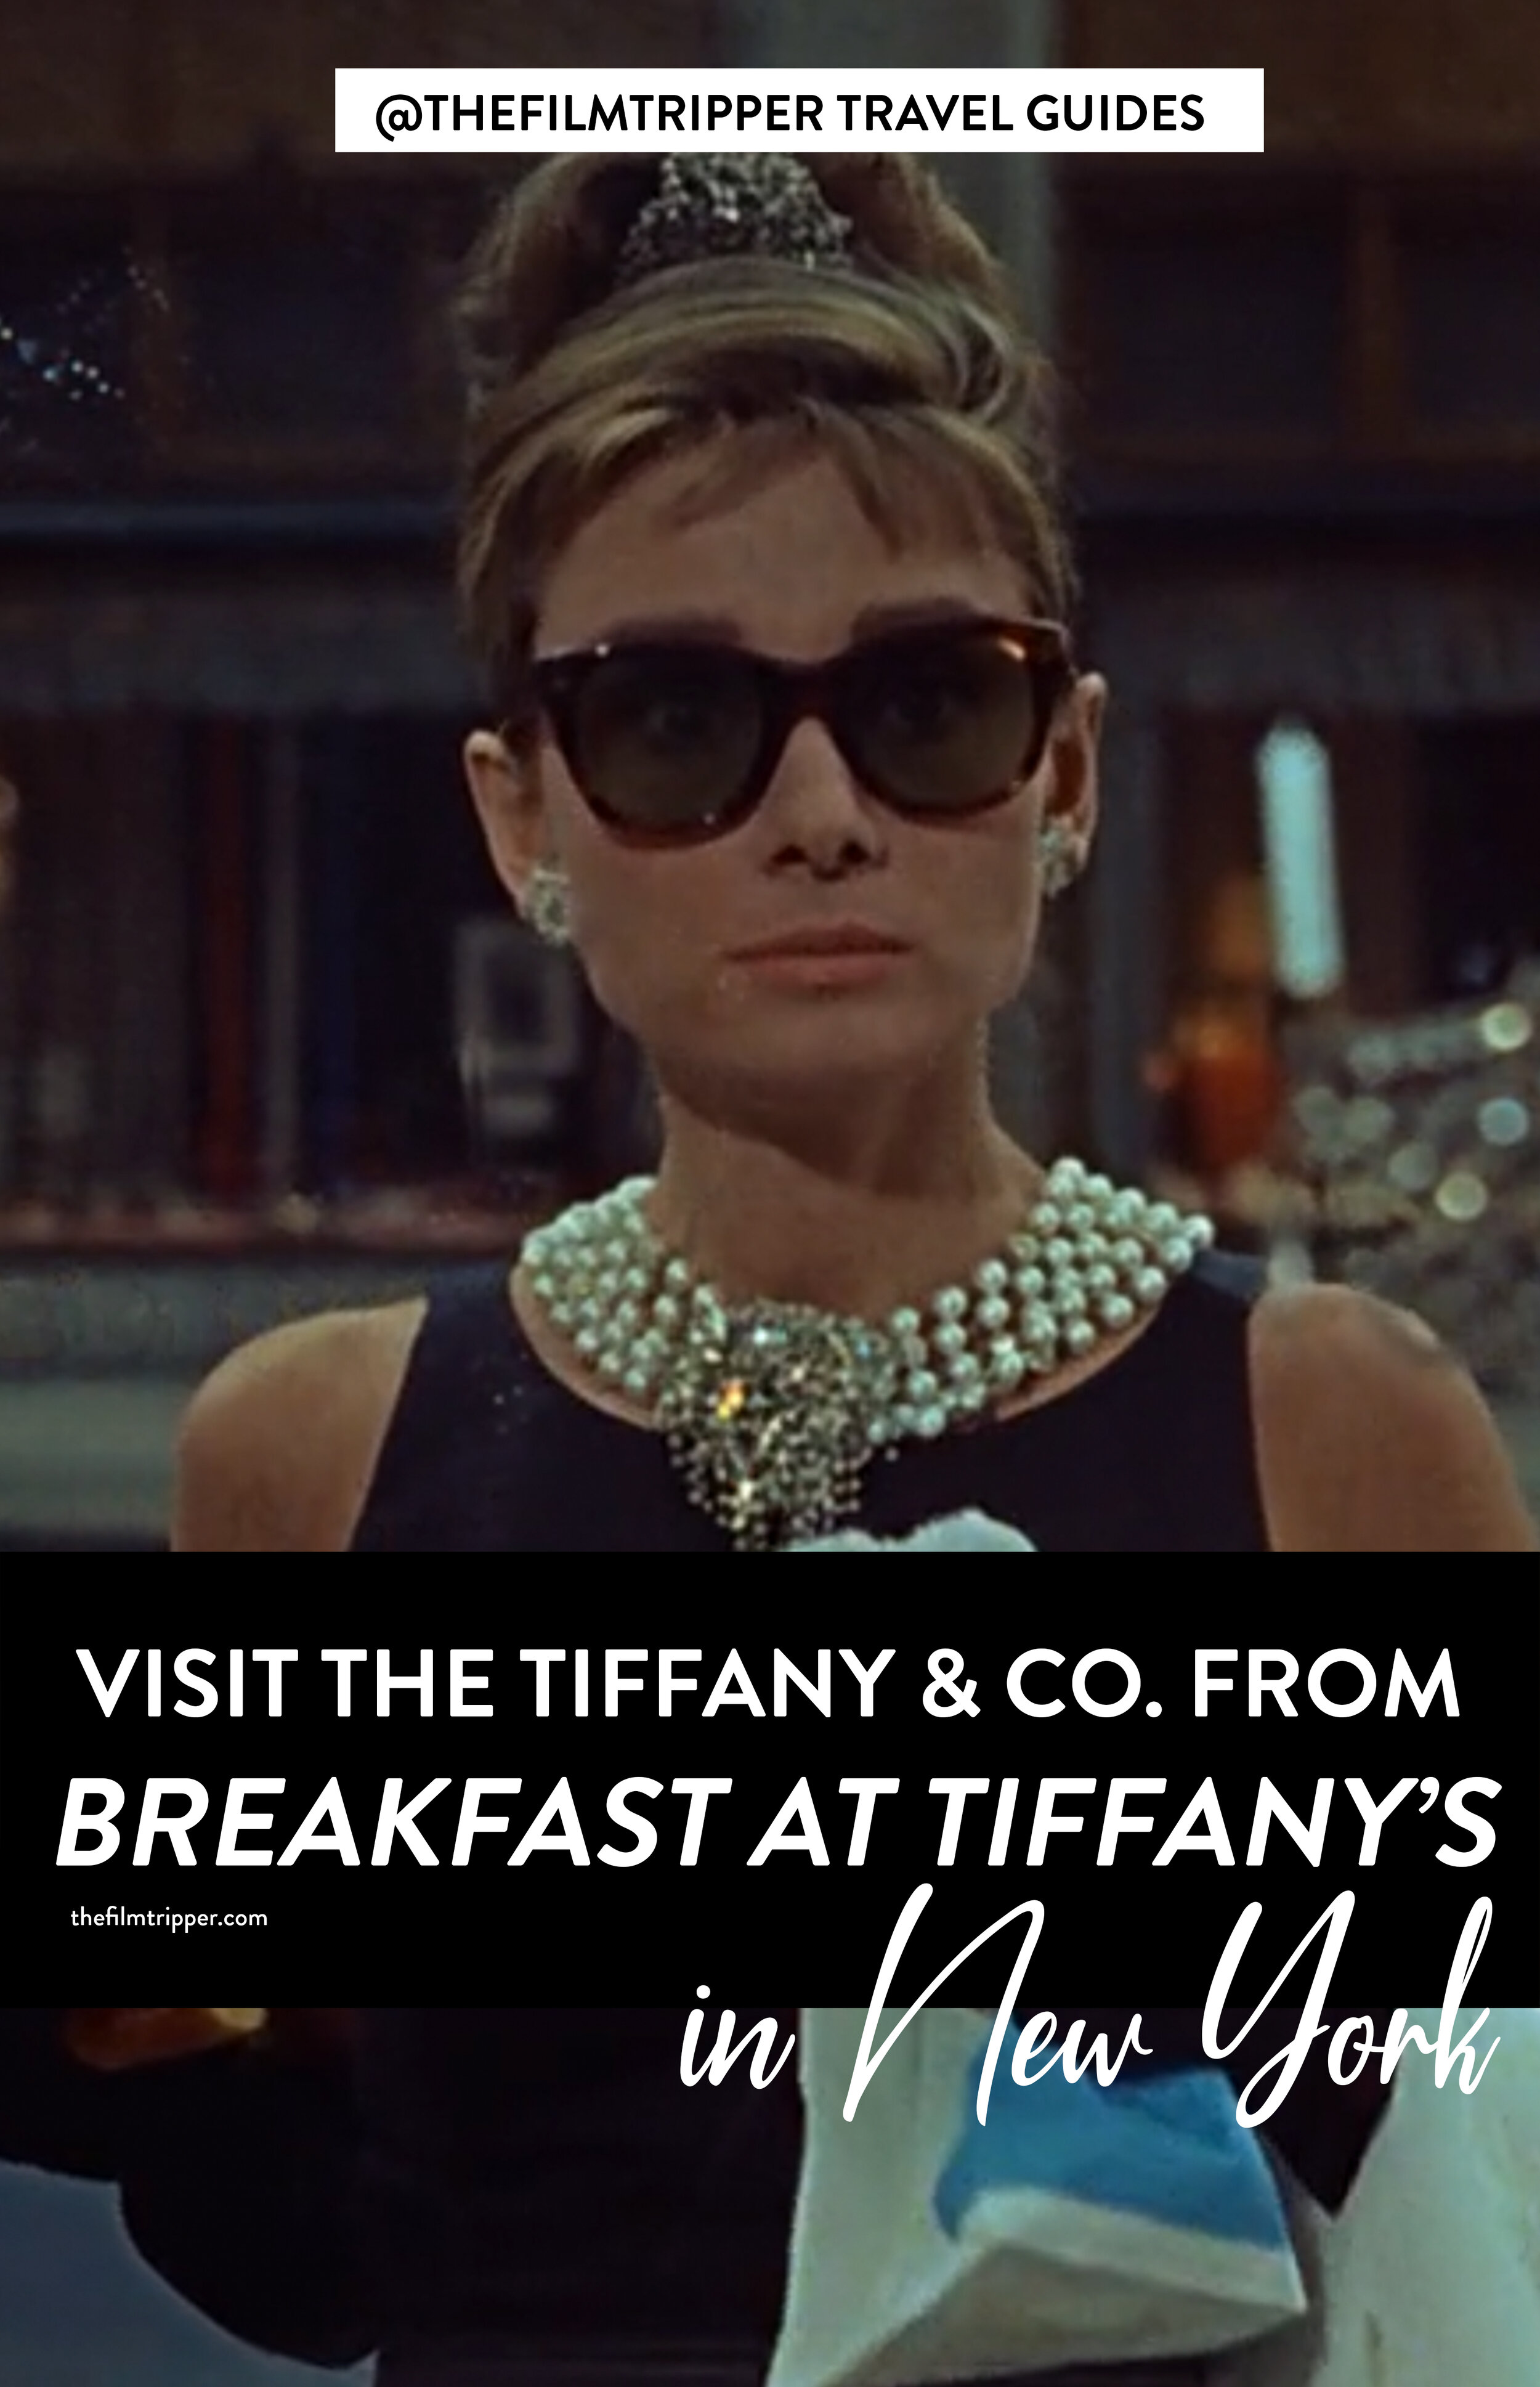 breakfast at tiffany's book review